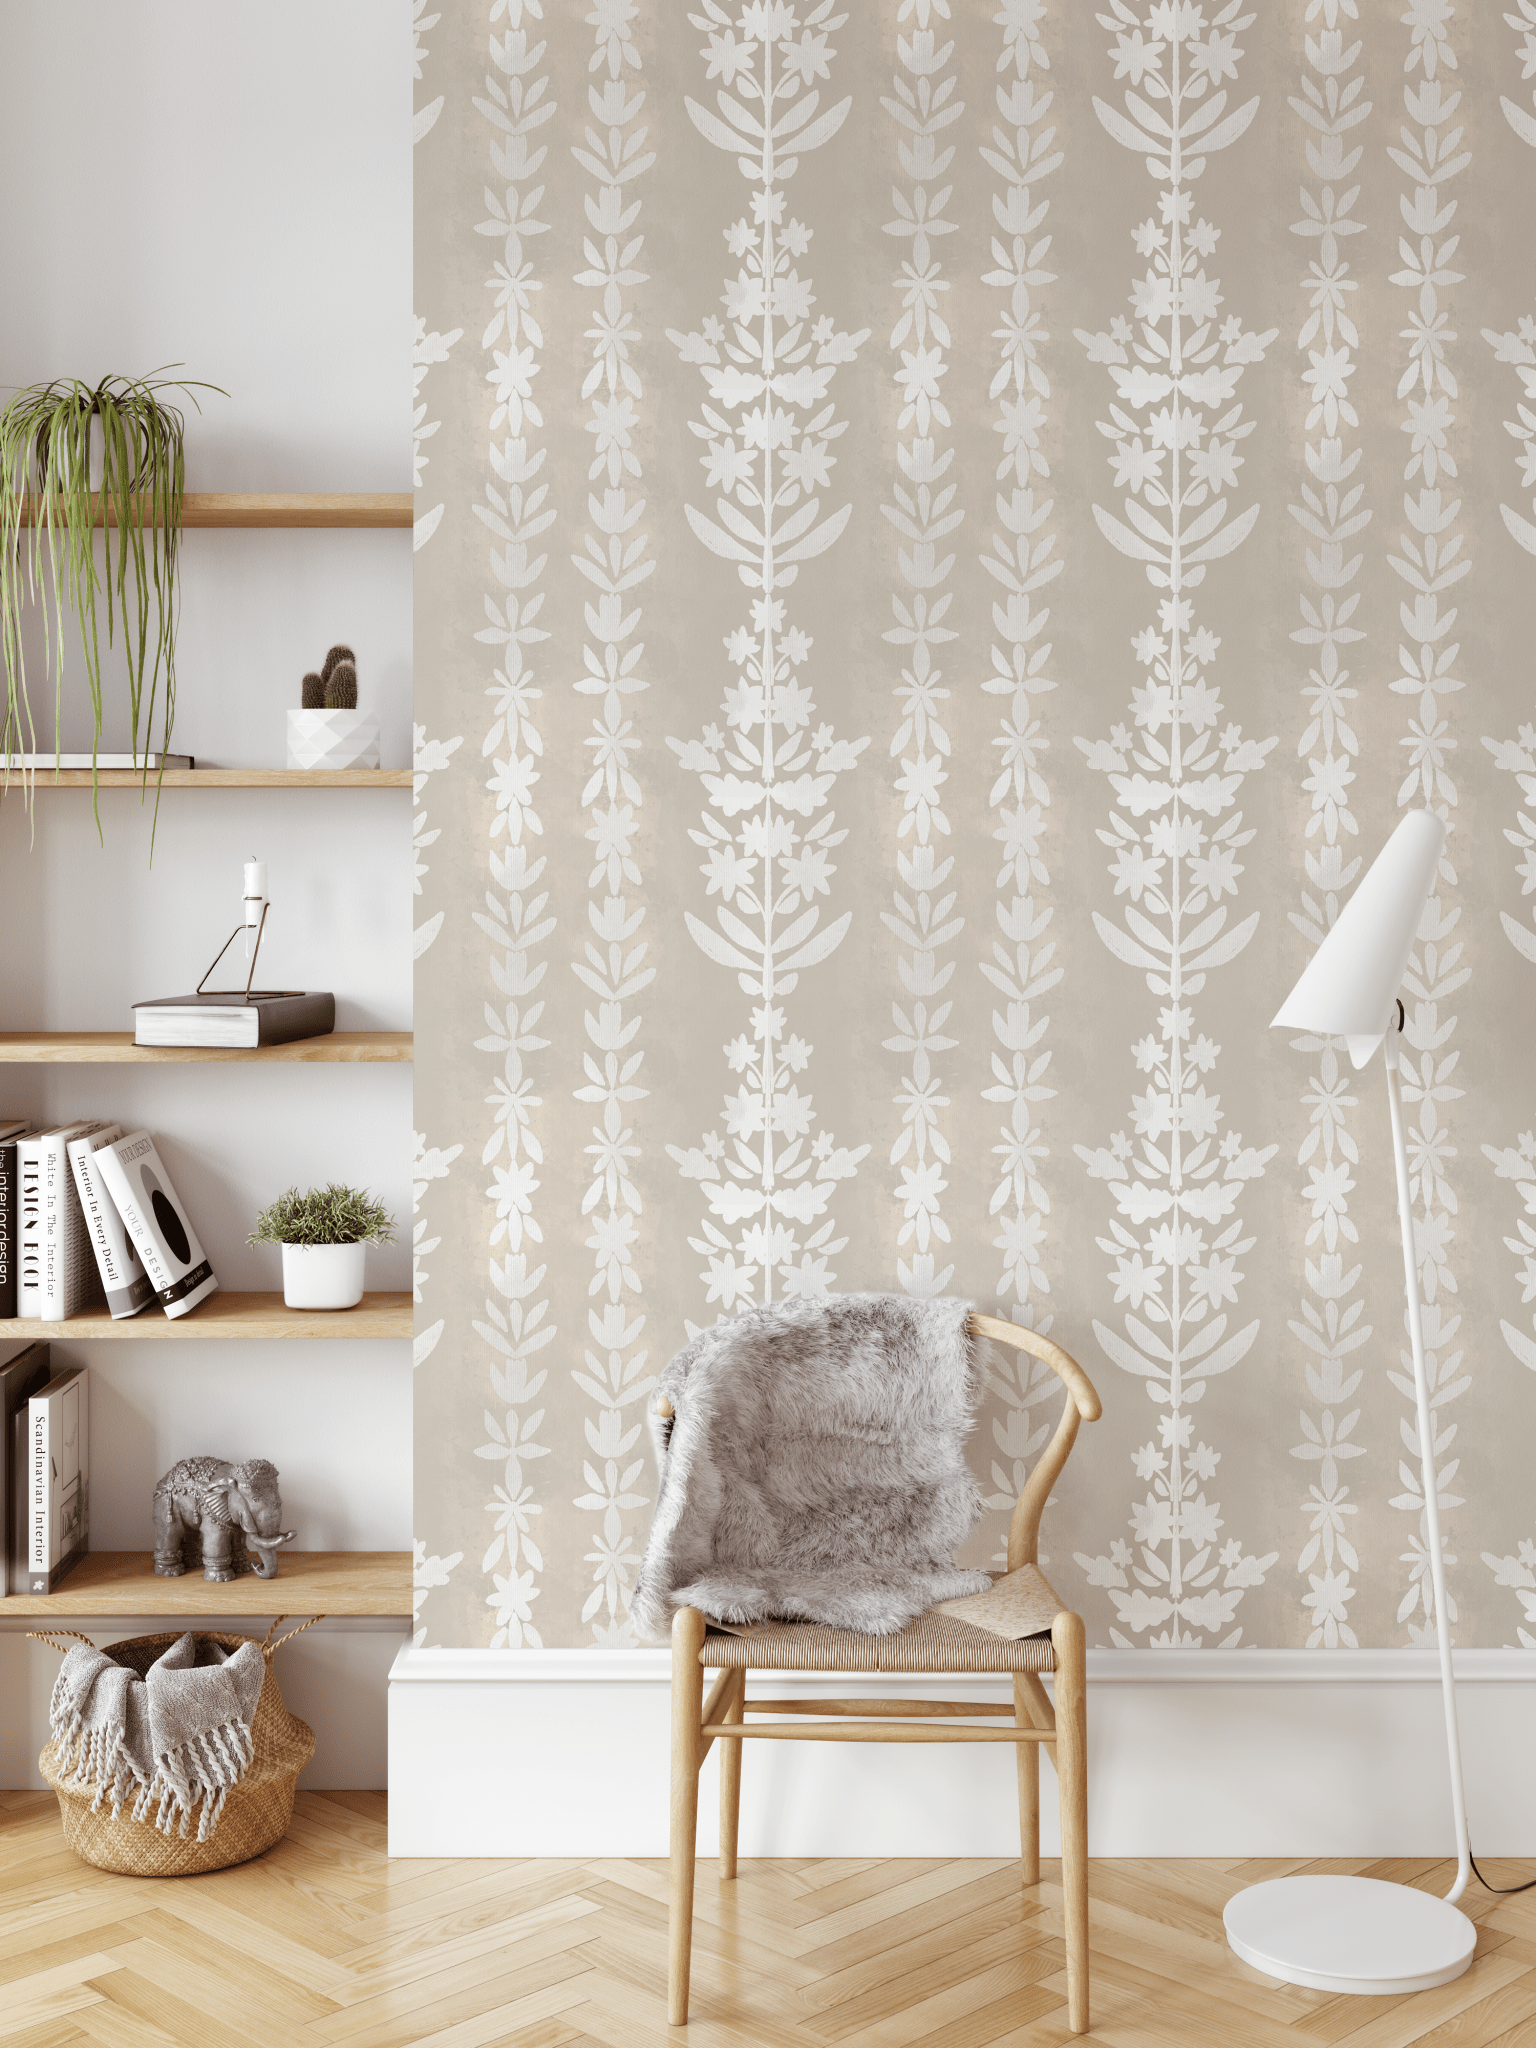 Boho style living room featuring earth toned cream and white self adhesive wallpaper